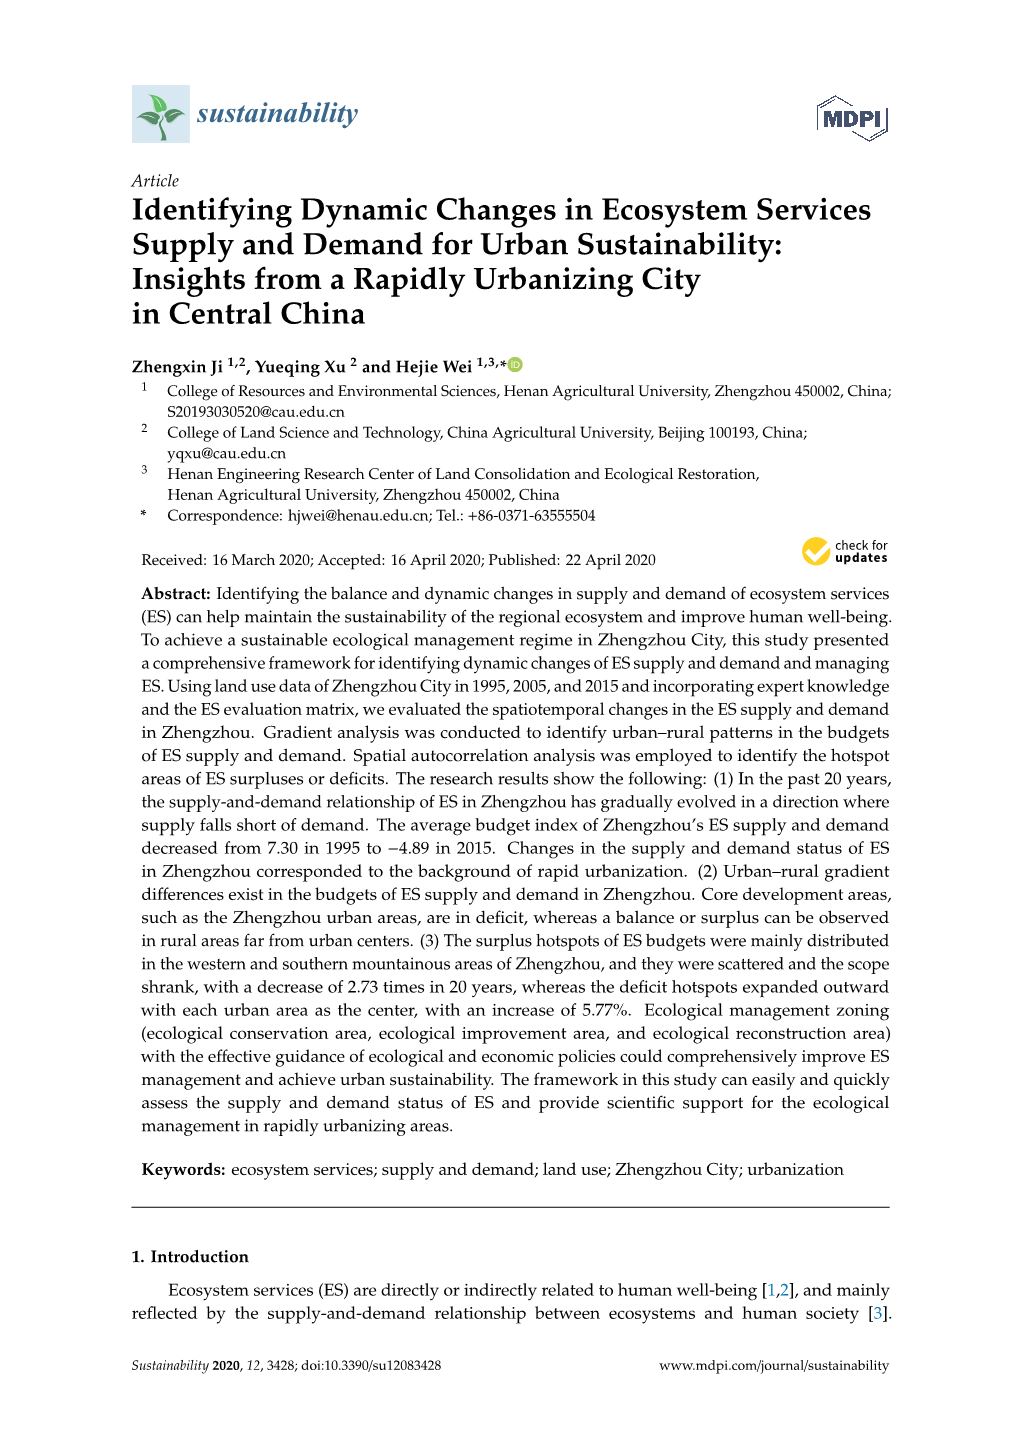 Identifying Dynamic Changes in Ecosystem Services Supply and Demand for Urban Sustainability: Insights from a Rapidly Urbanizing City in Central China